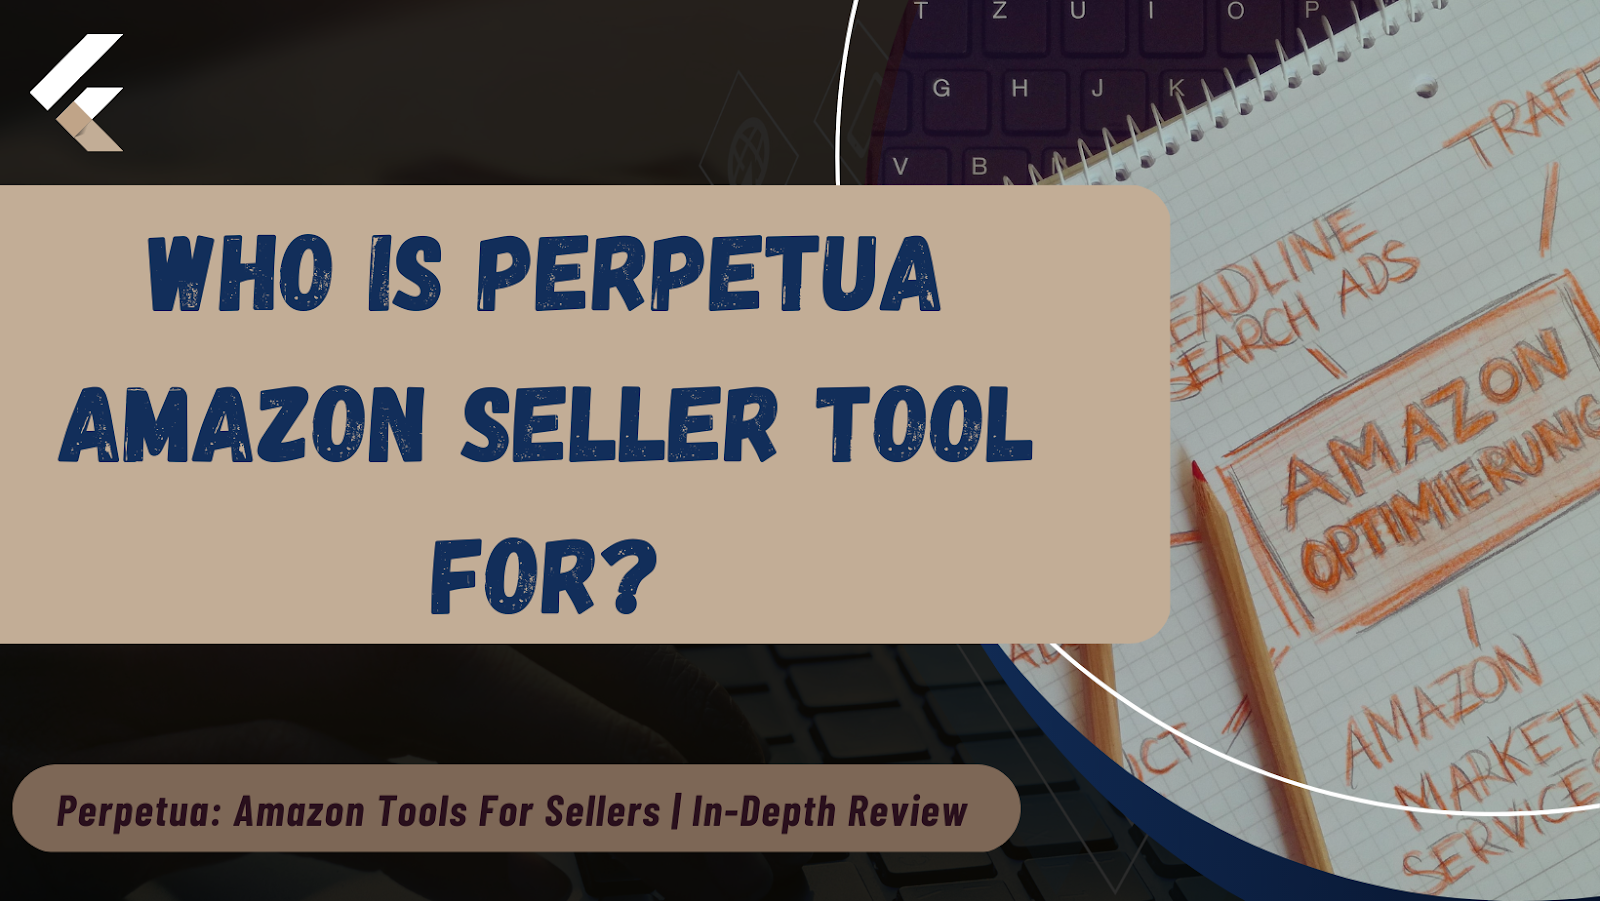 Who Is Perpetua Amazon Seller Tool For?